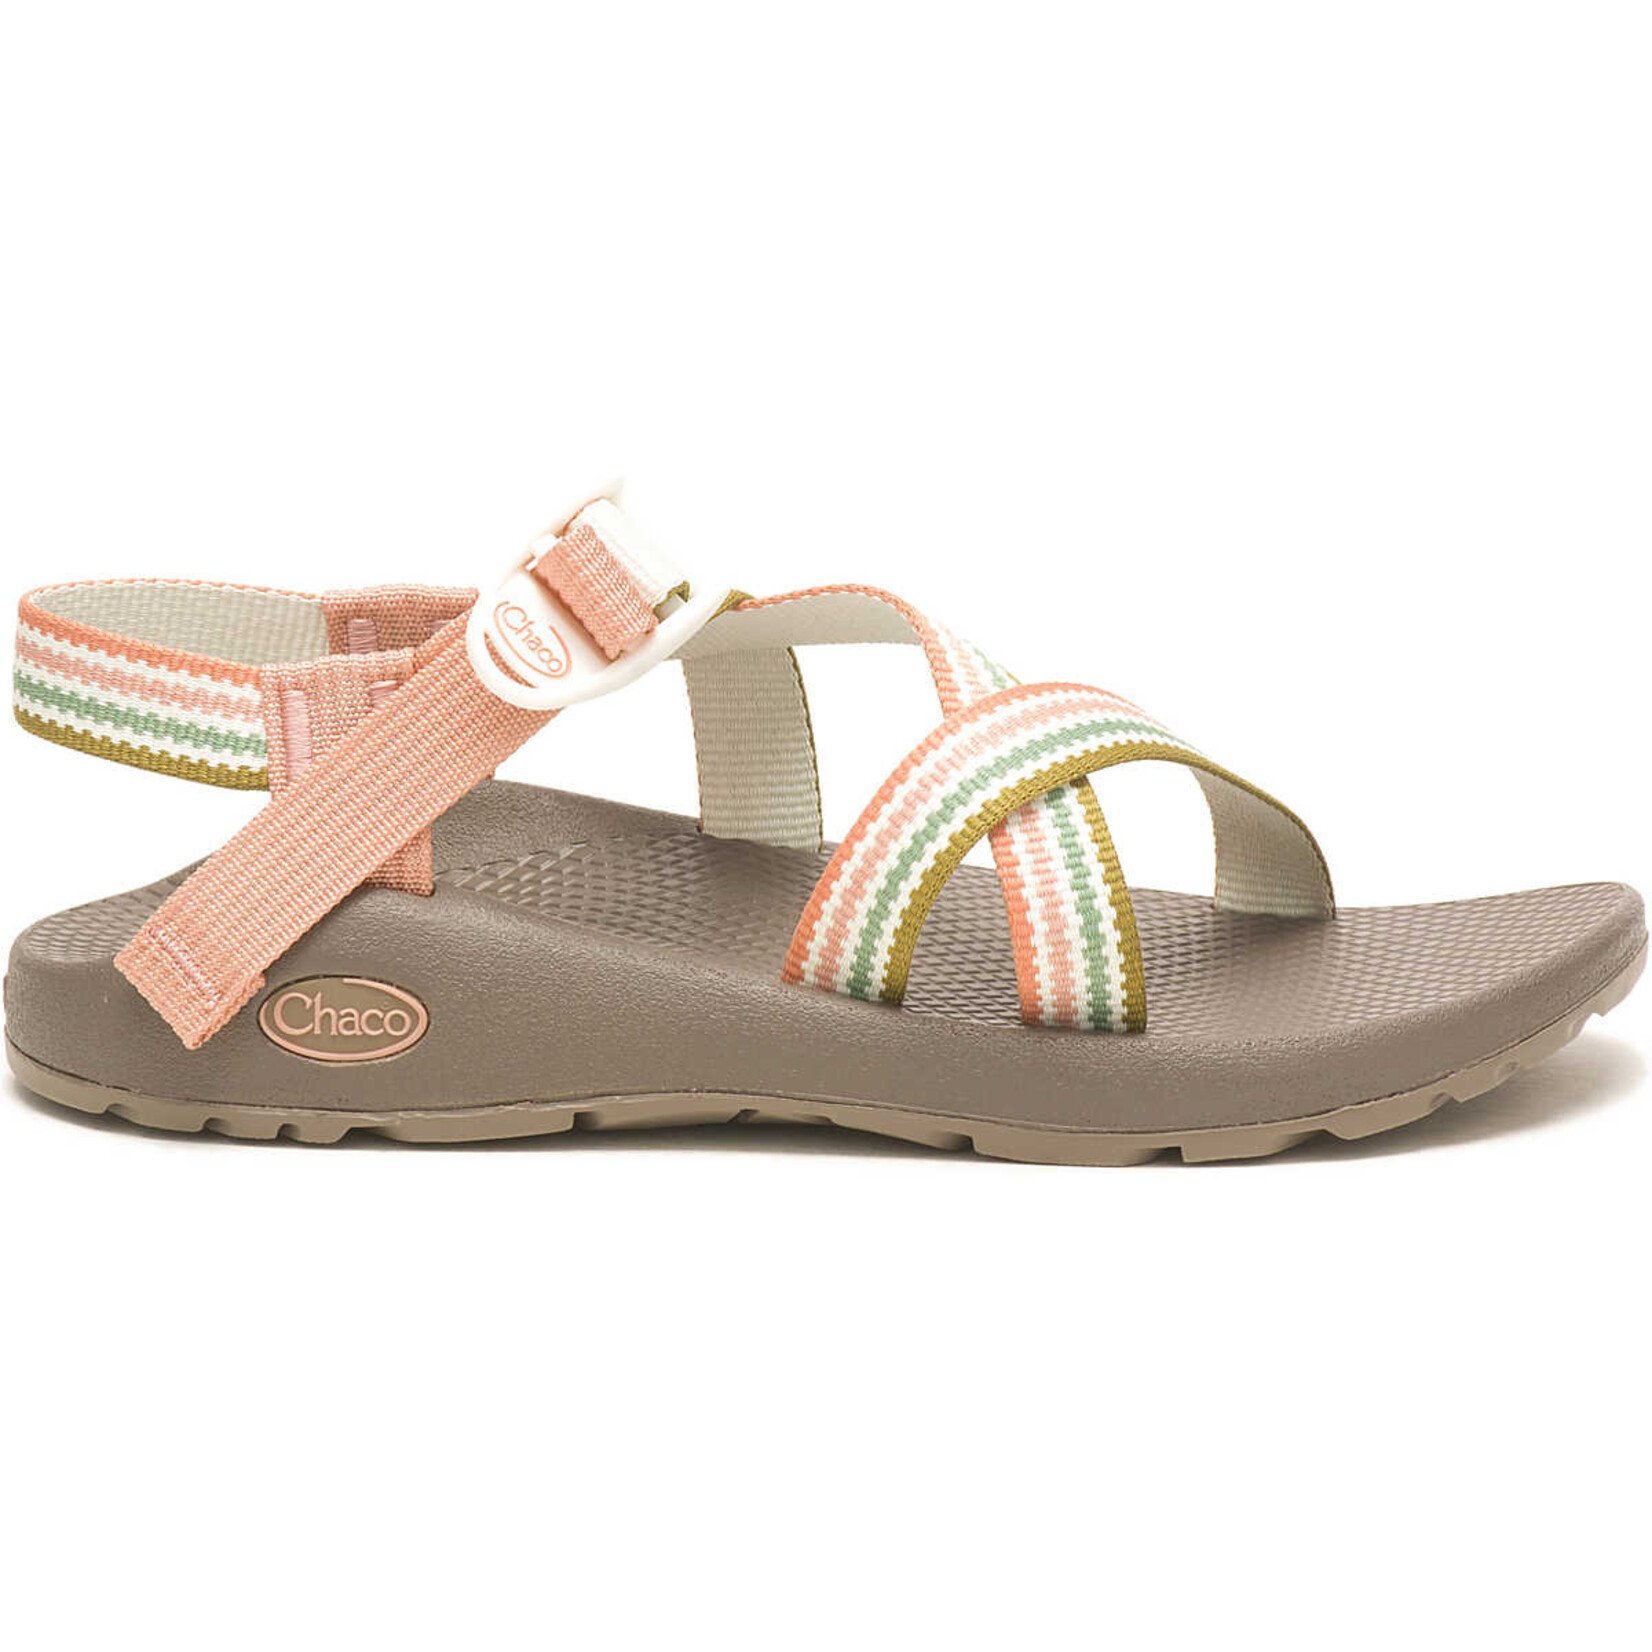 Chaco Chaco Women's Z/1 Classic Sandals